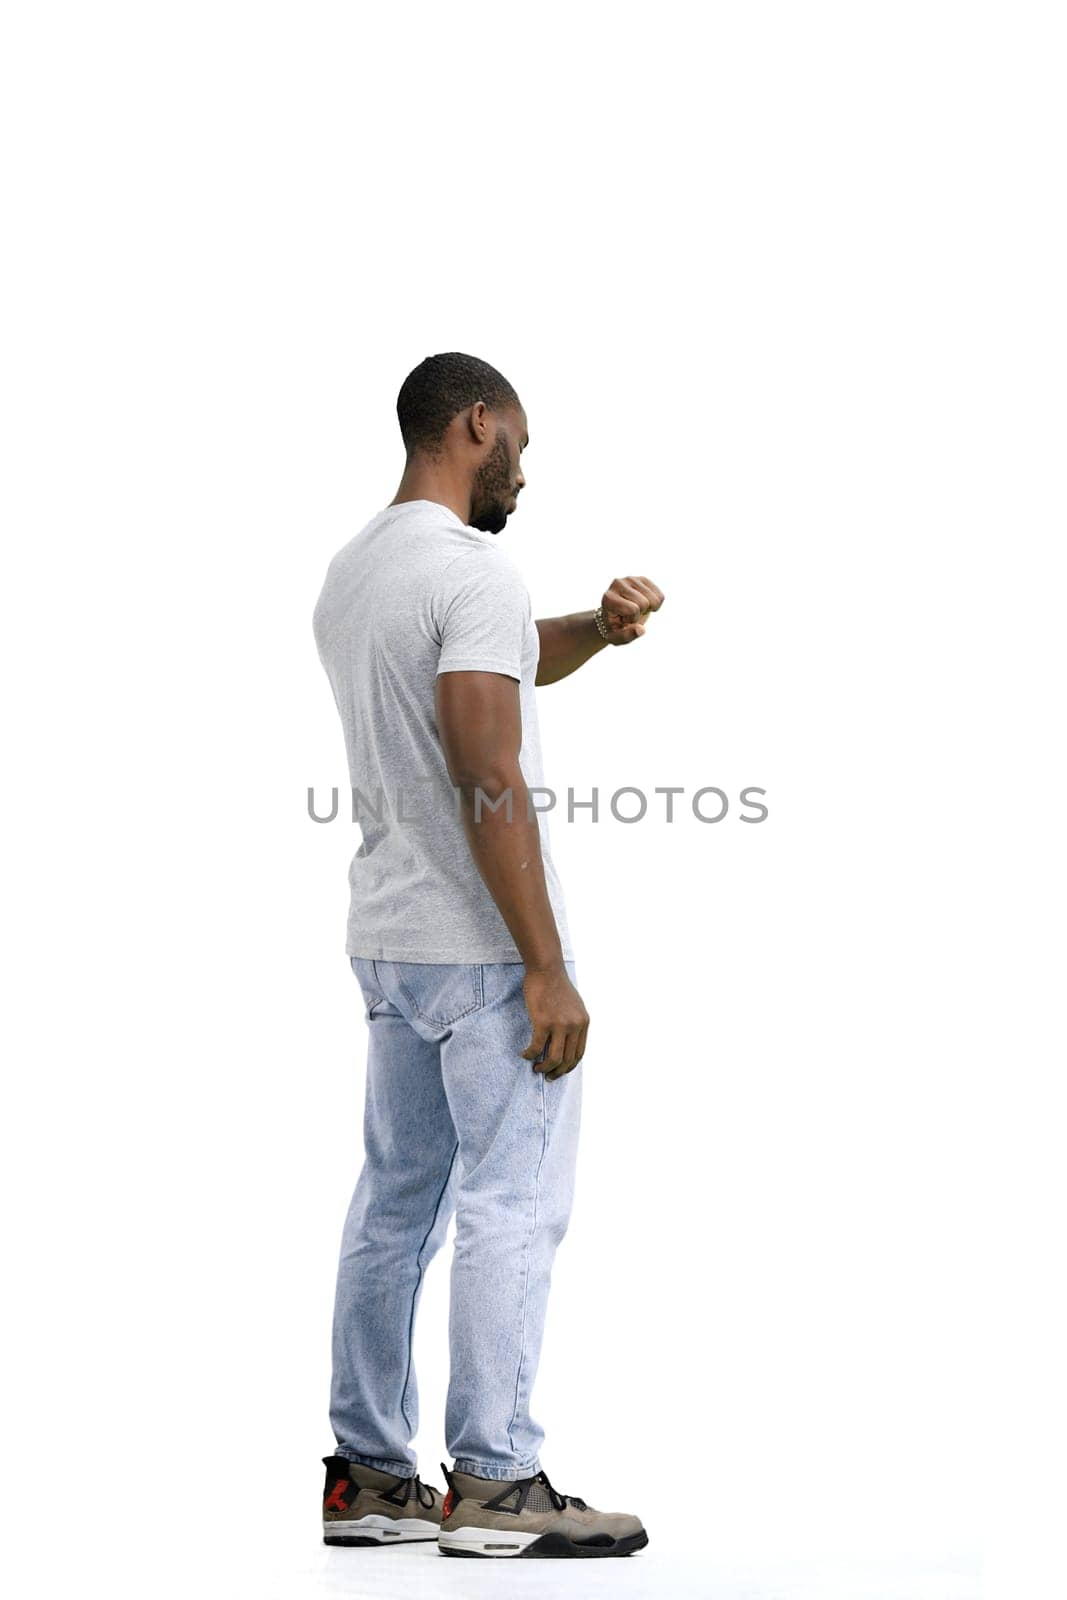 A man, full-length, on a white background, looks at his watch.